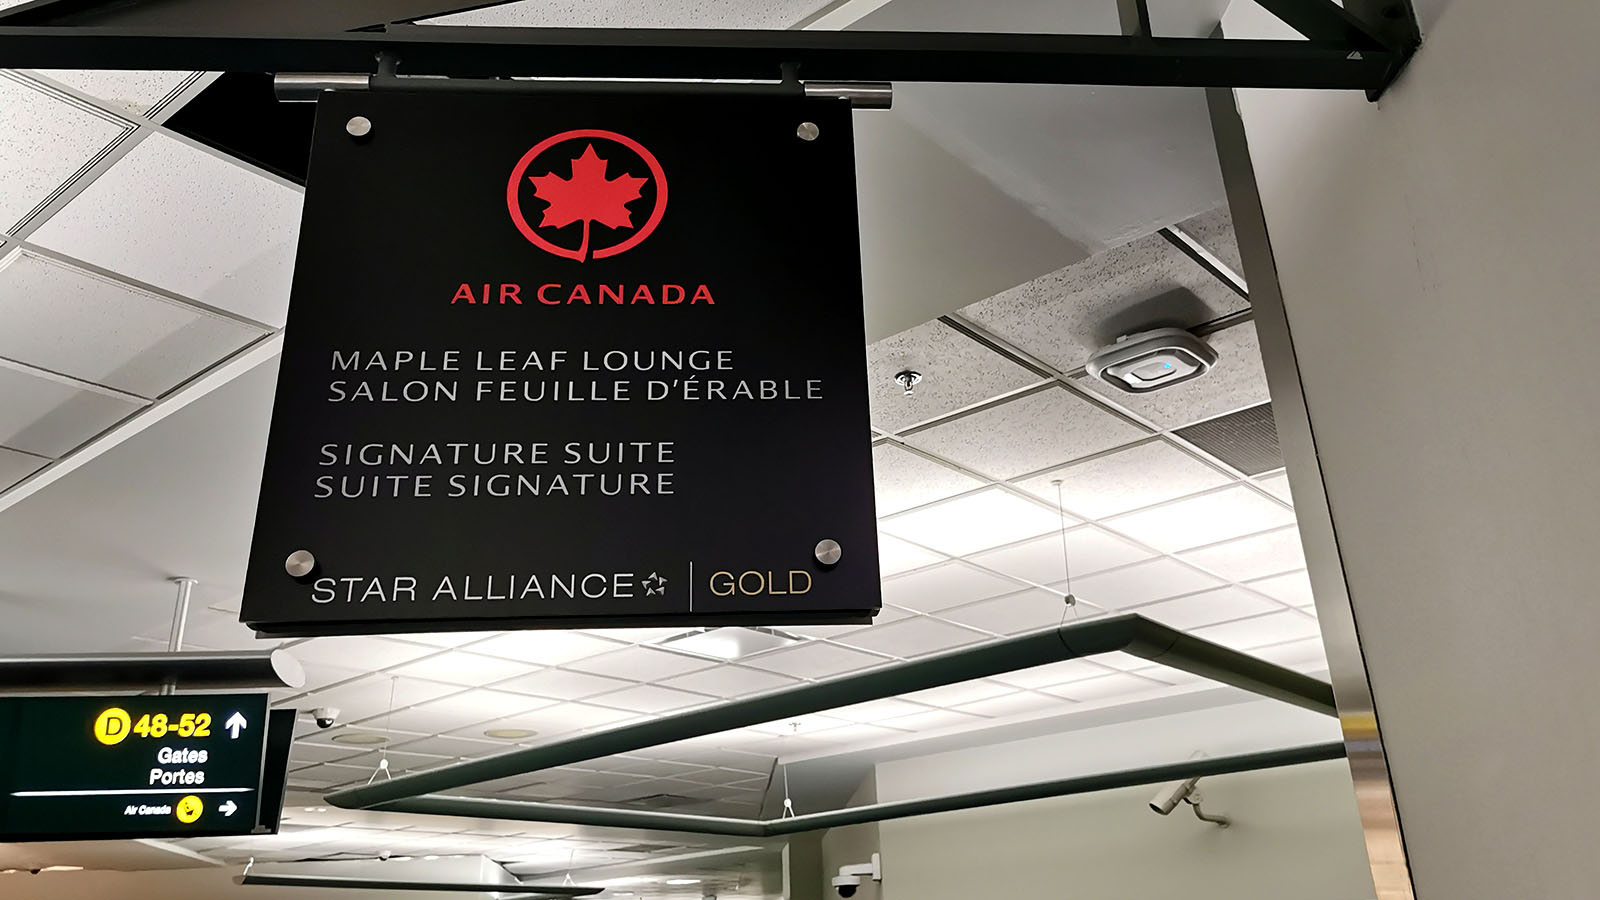 Air Canada lounge sign in Vancouver